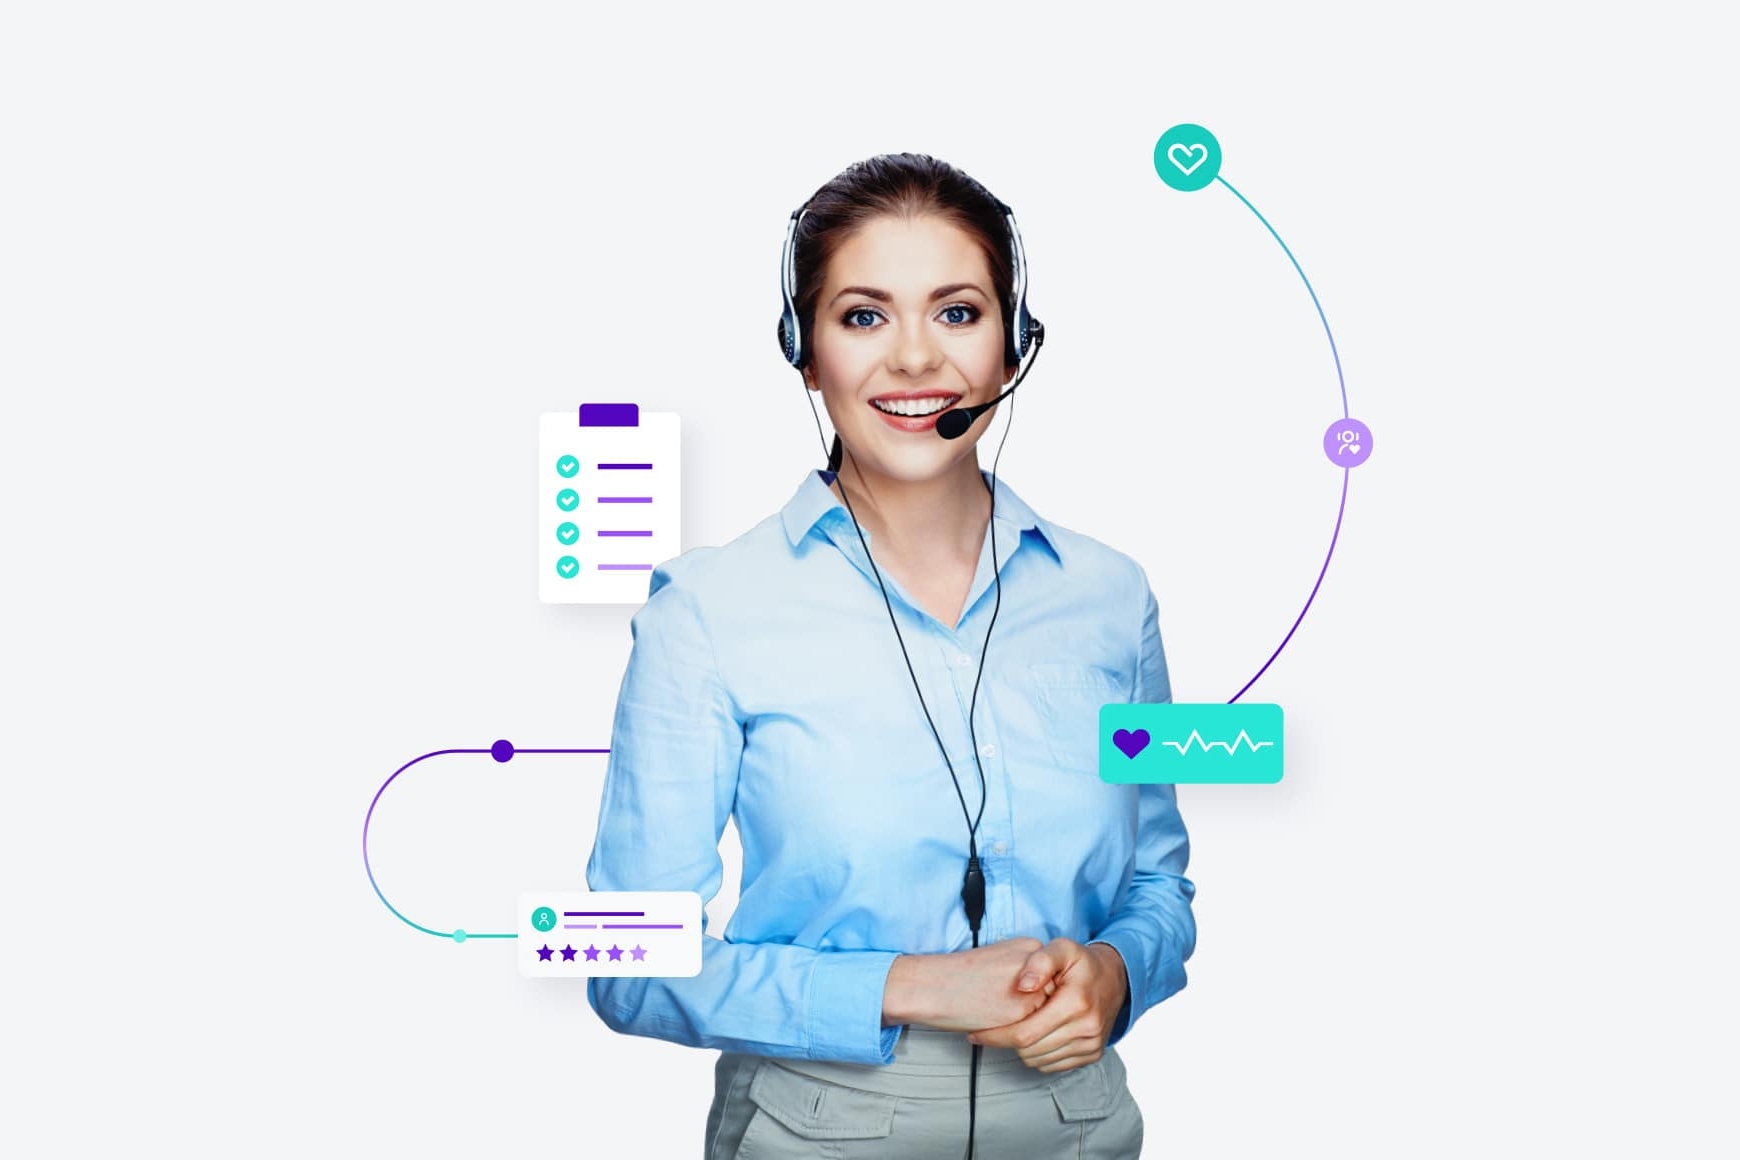 Unlocking better patient journeys through AI in the contact center